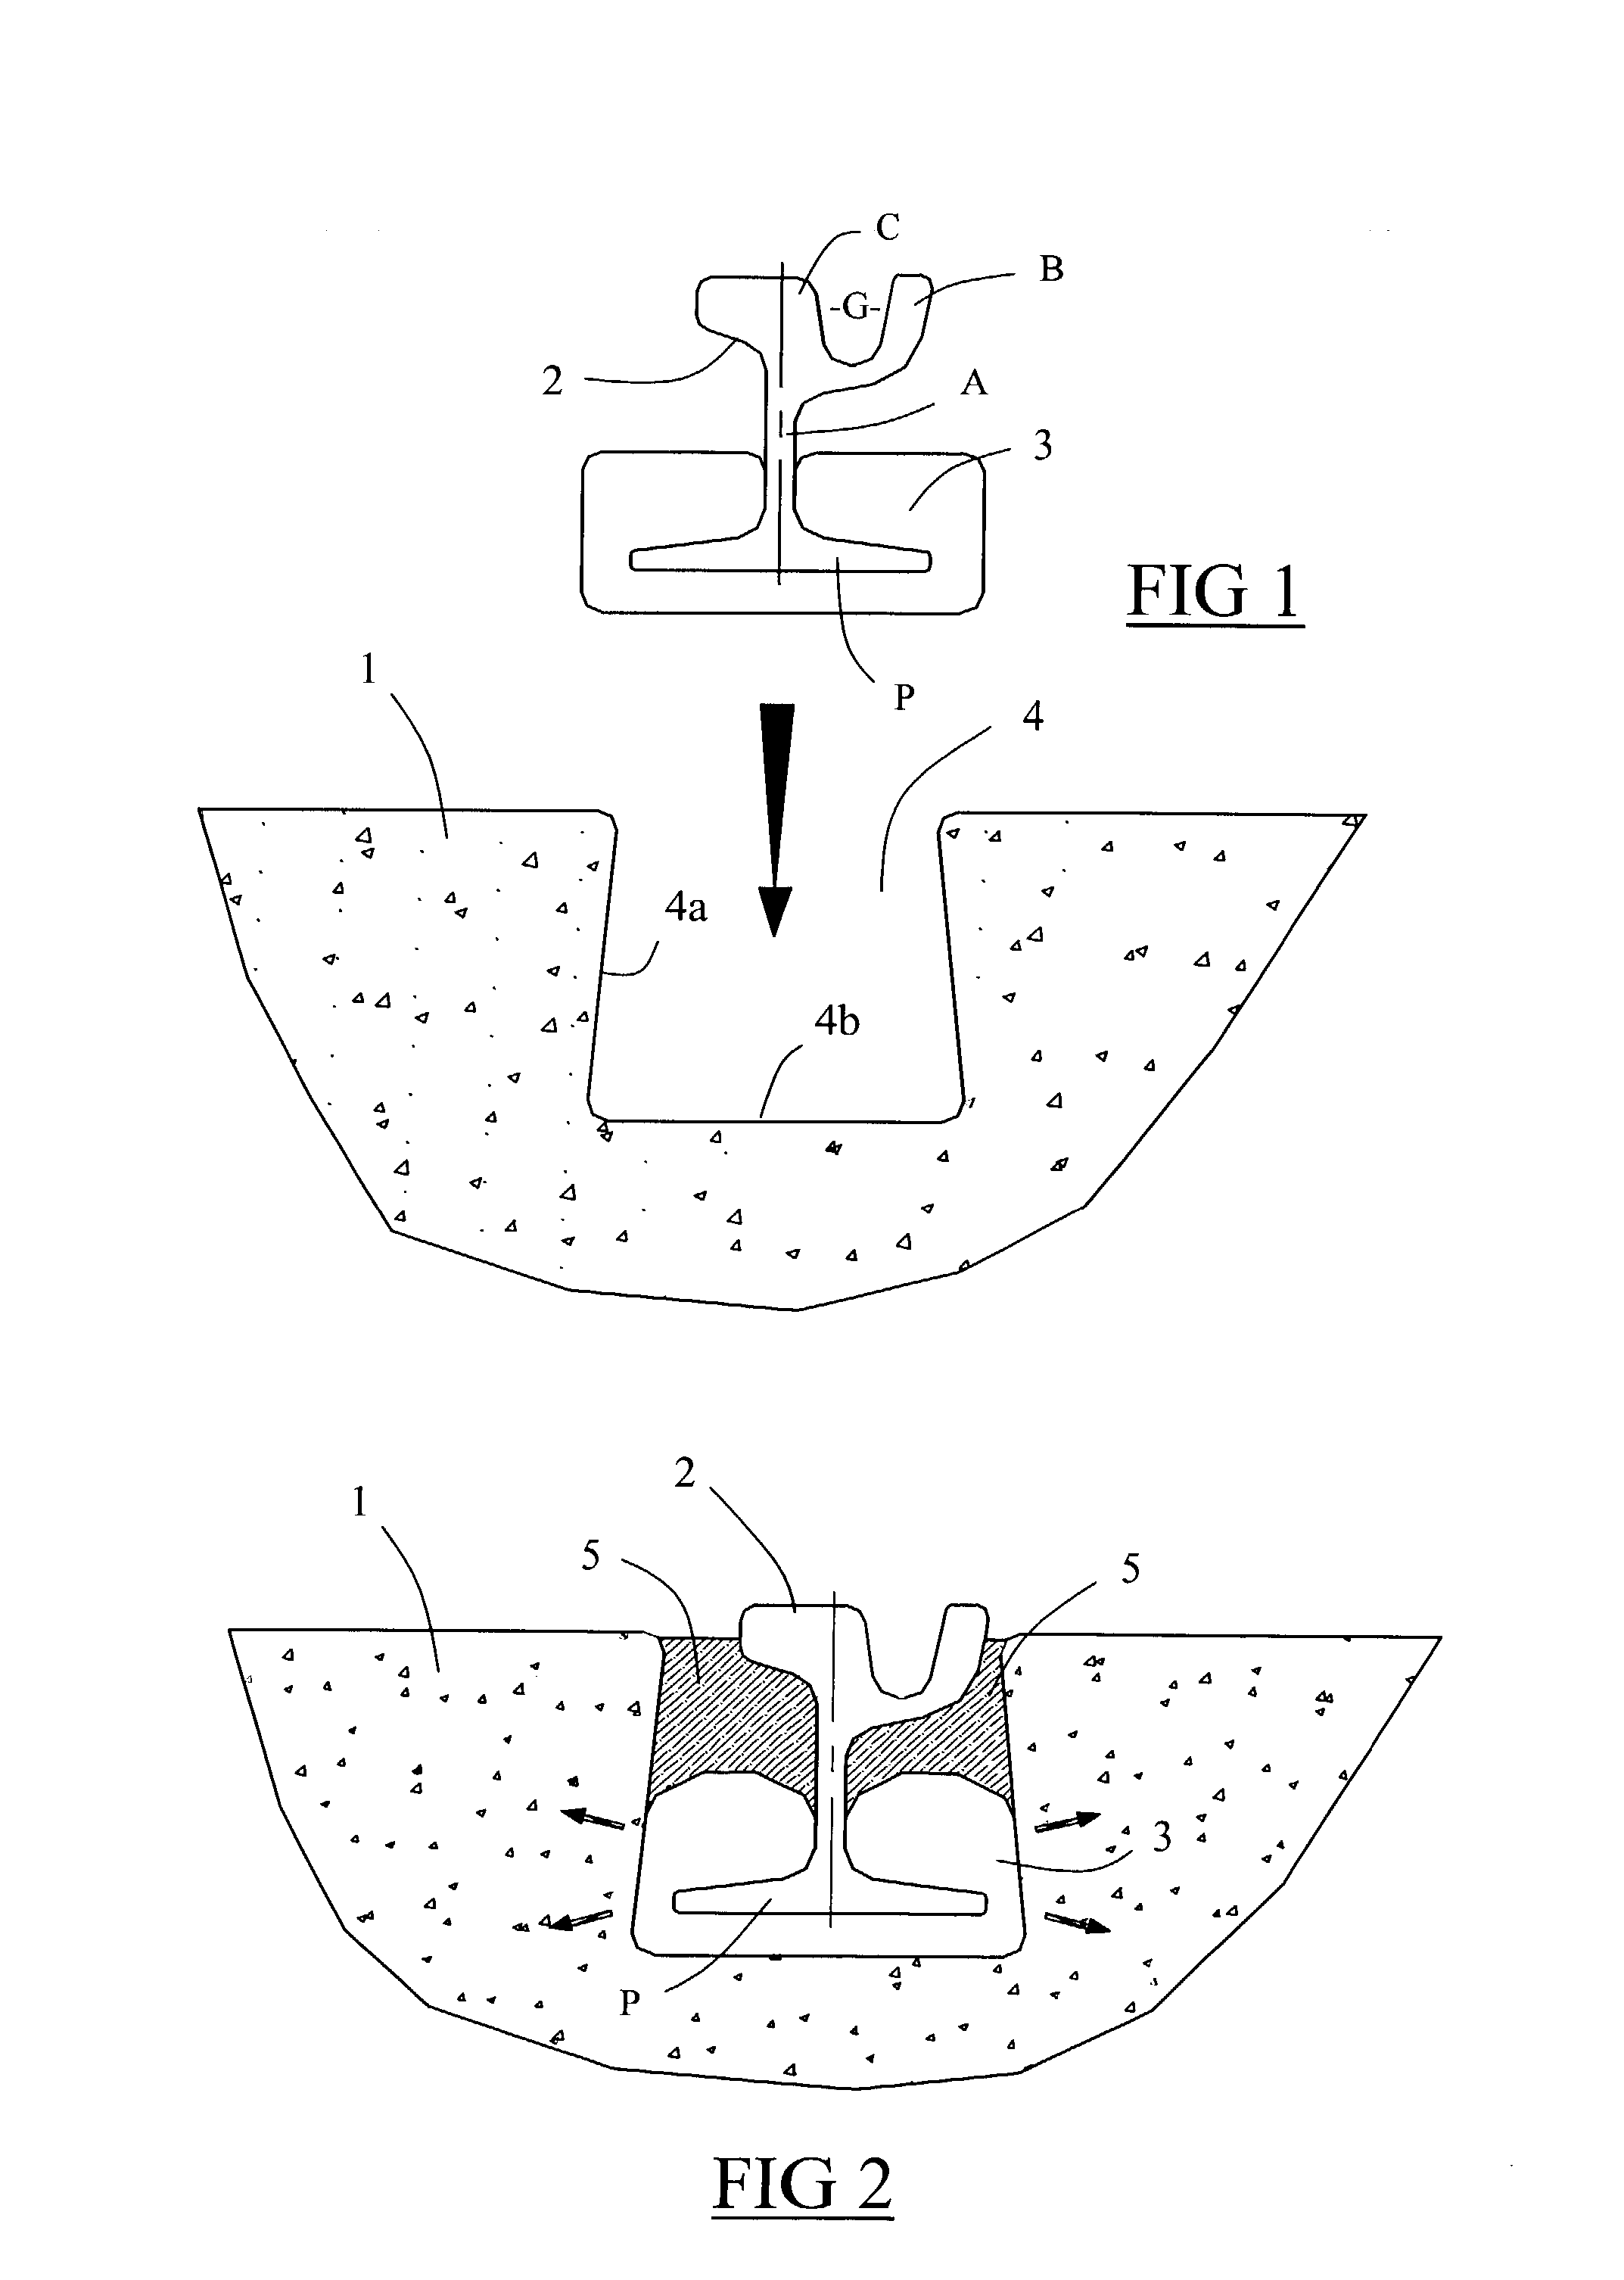 Method of constructing a rail track on a track-receiving concrete slab